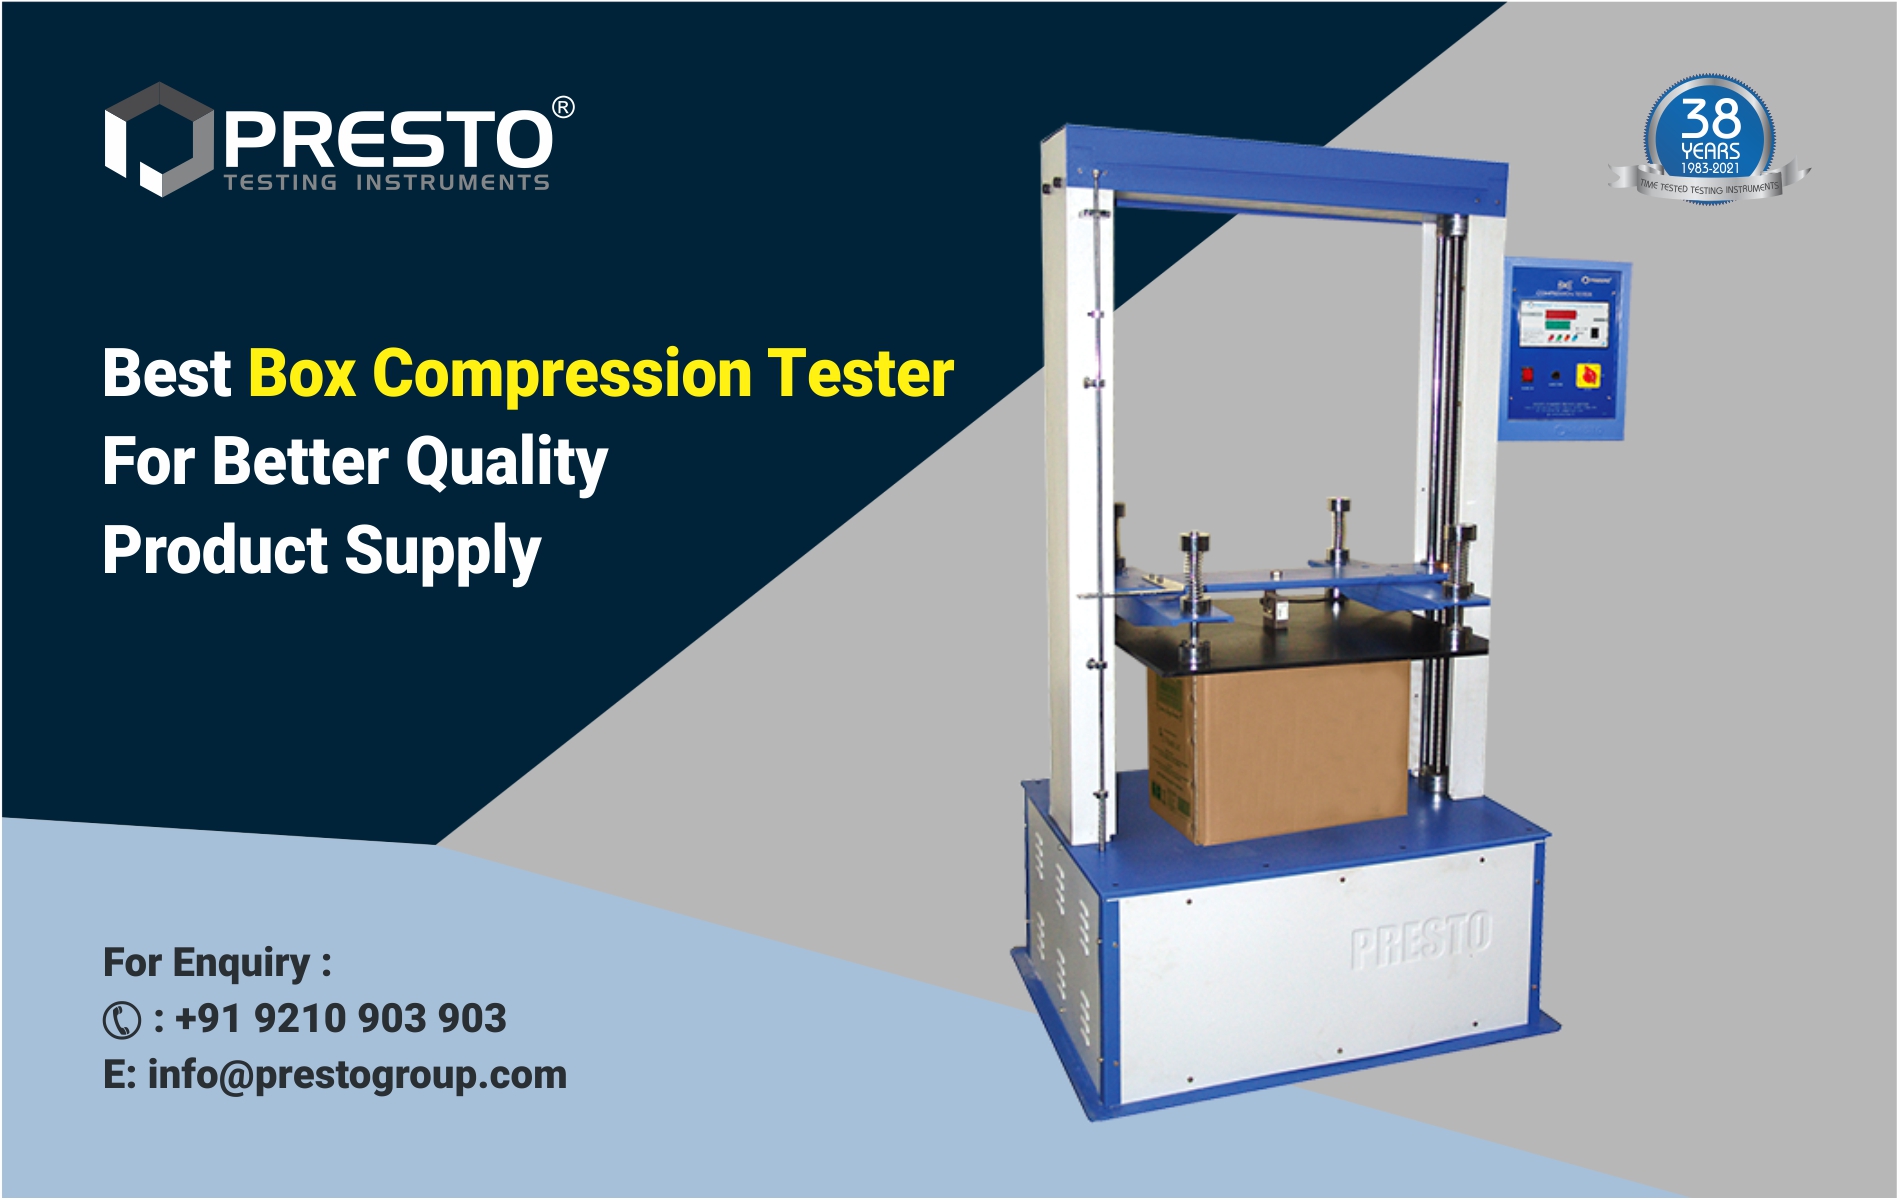 Best Box Compression Tester for Better Quality Product Supply